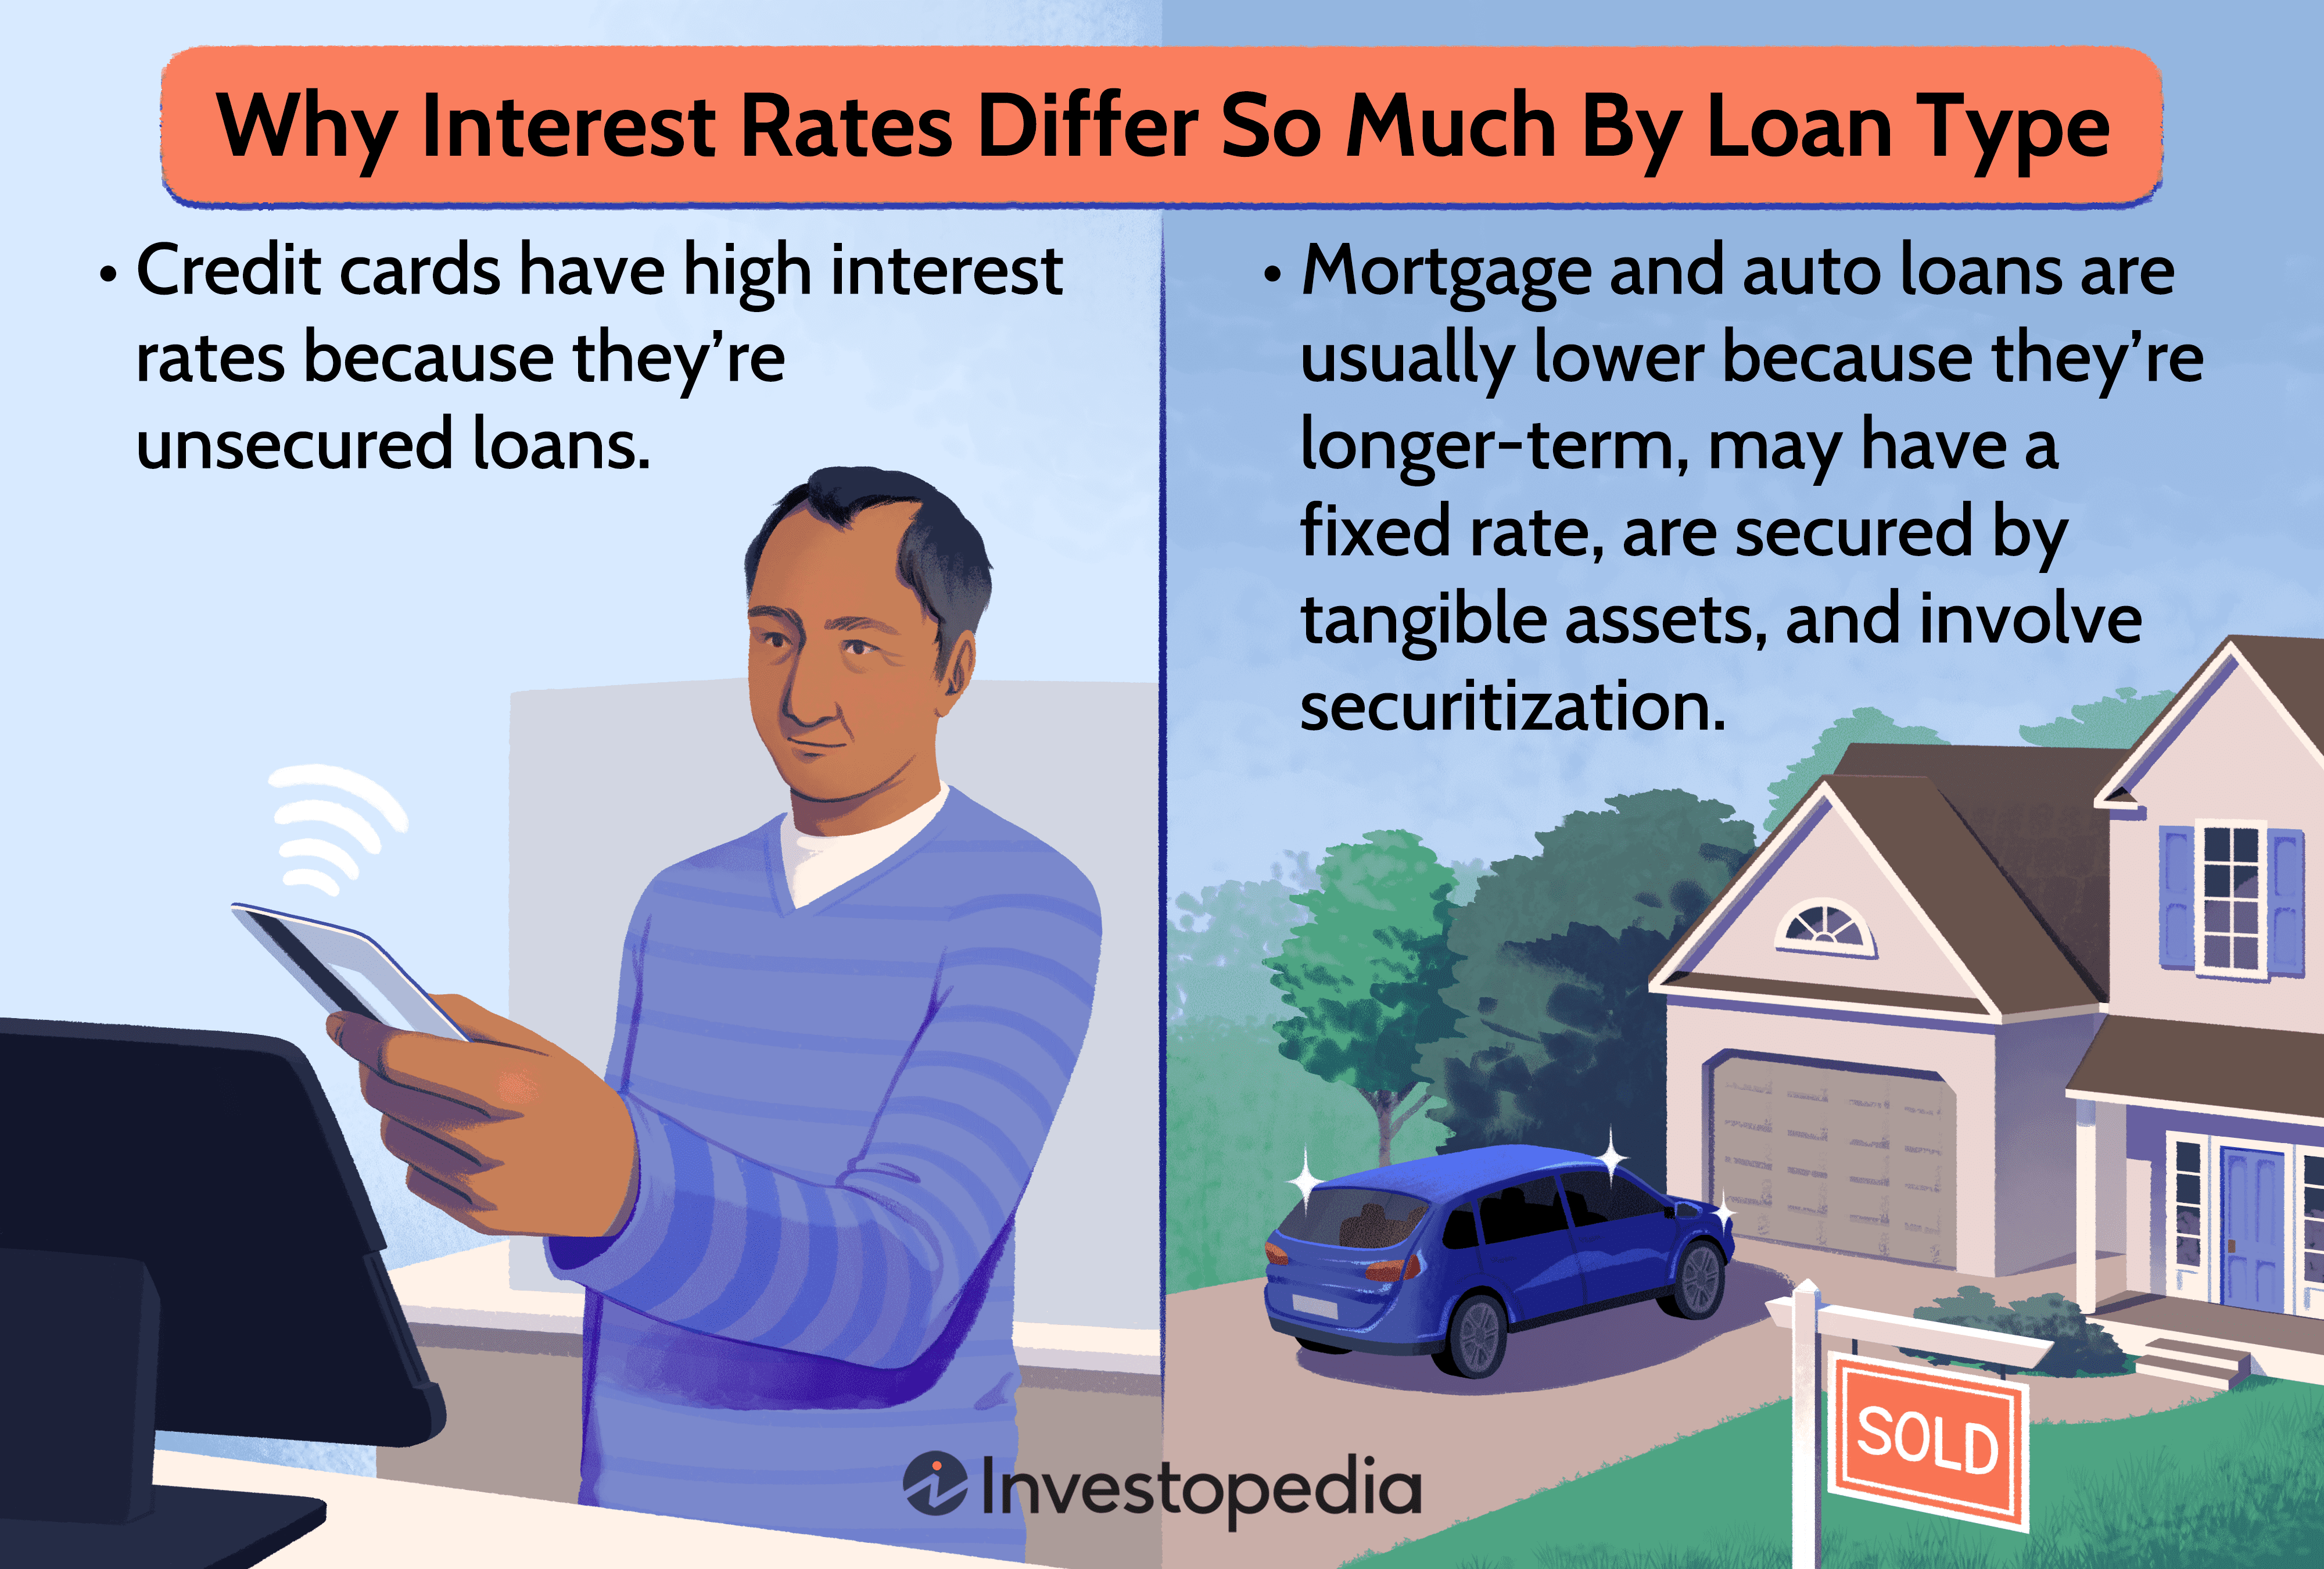 Why Interest Rates Differ So Much By Loan Type